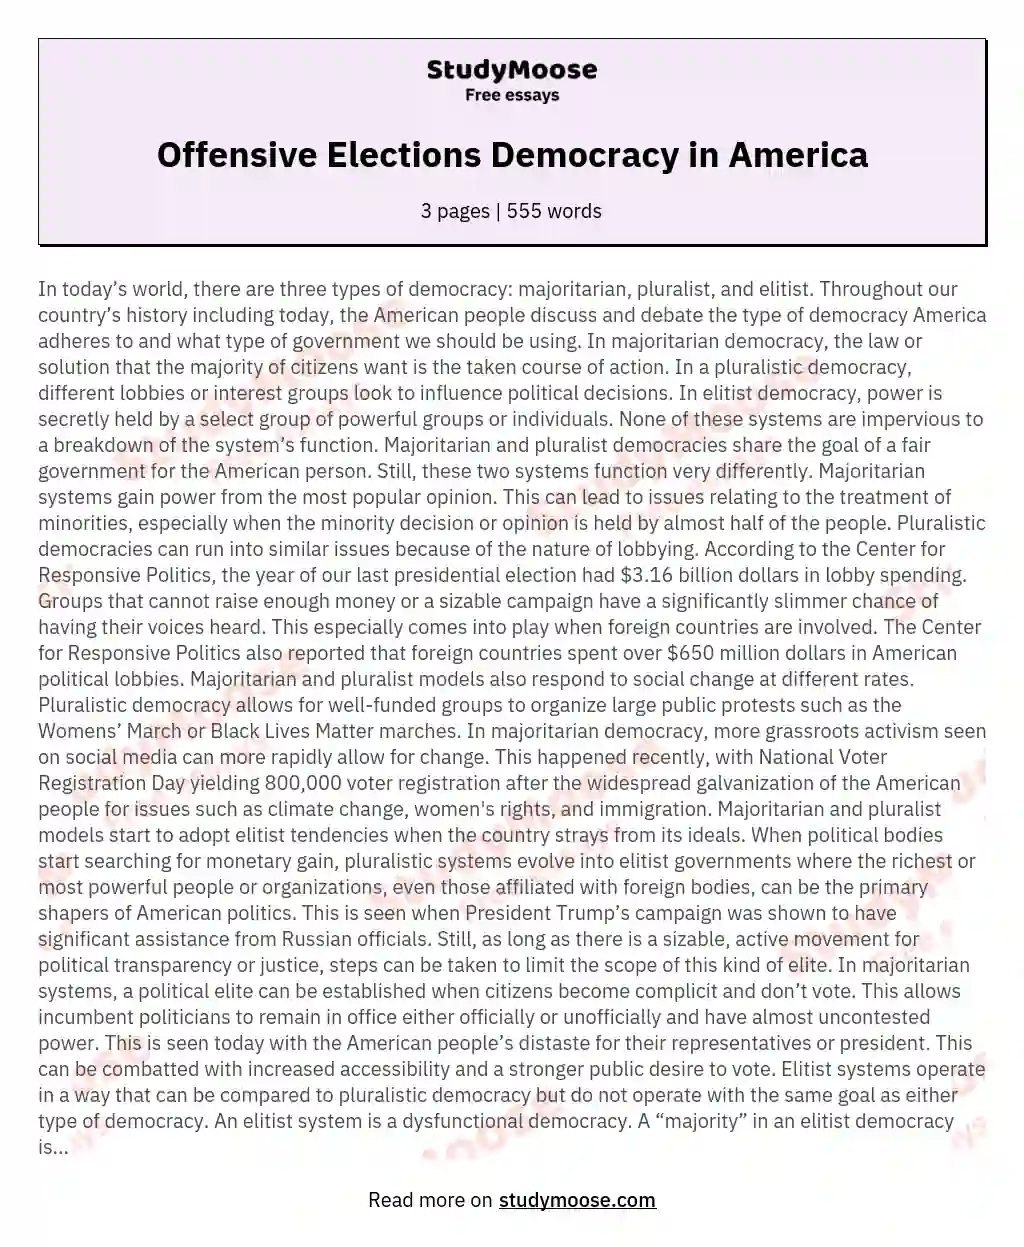 Offensive Elections Democracy in America essay